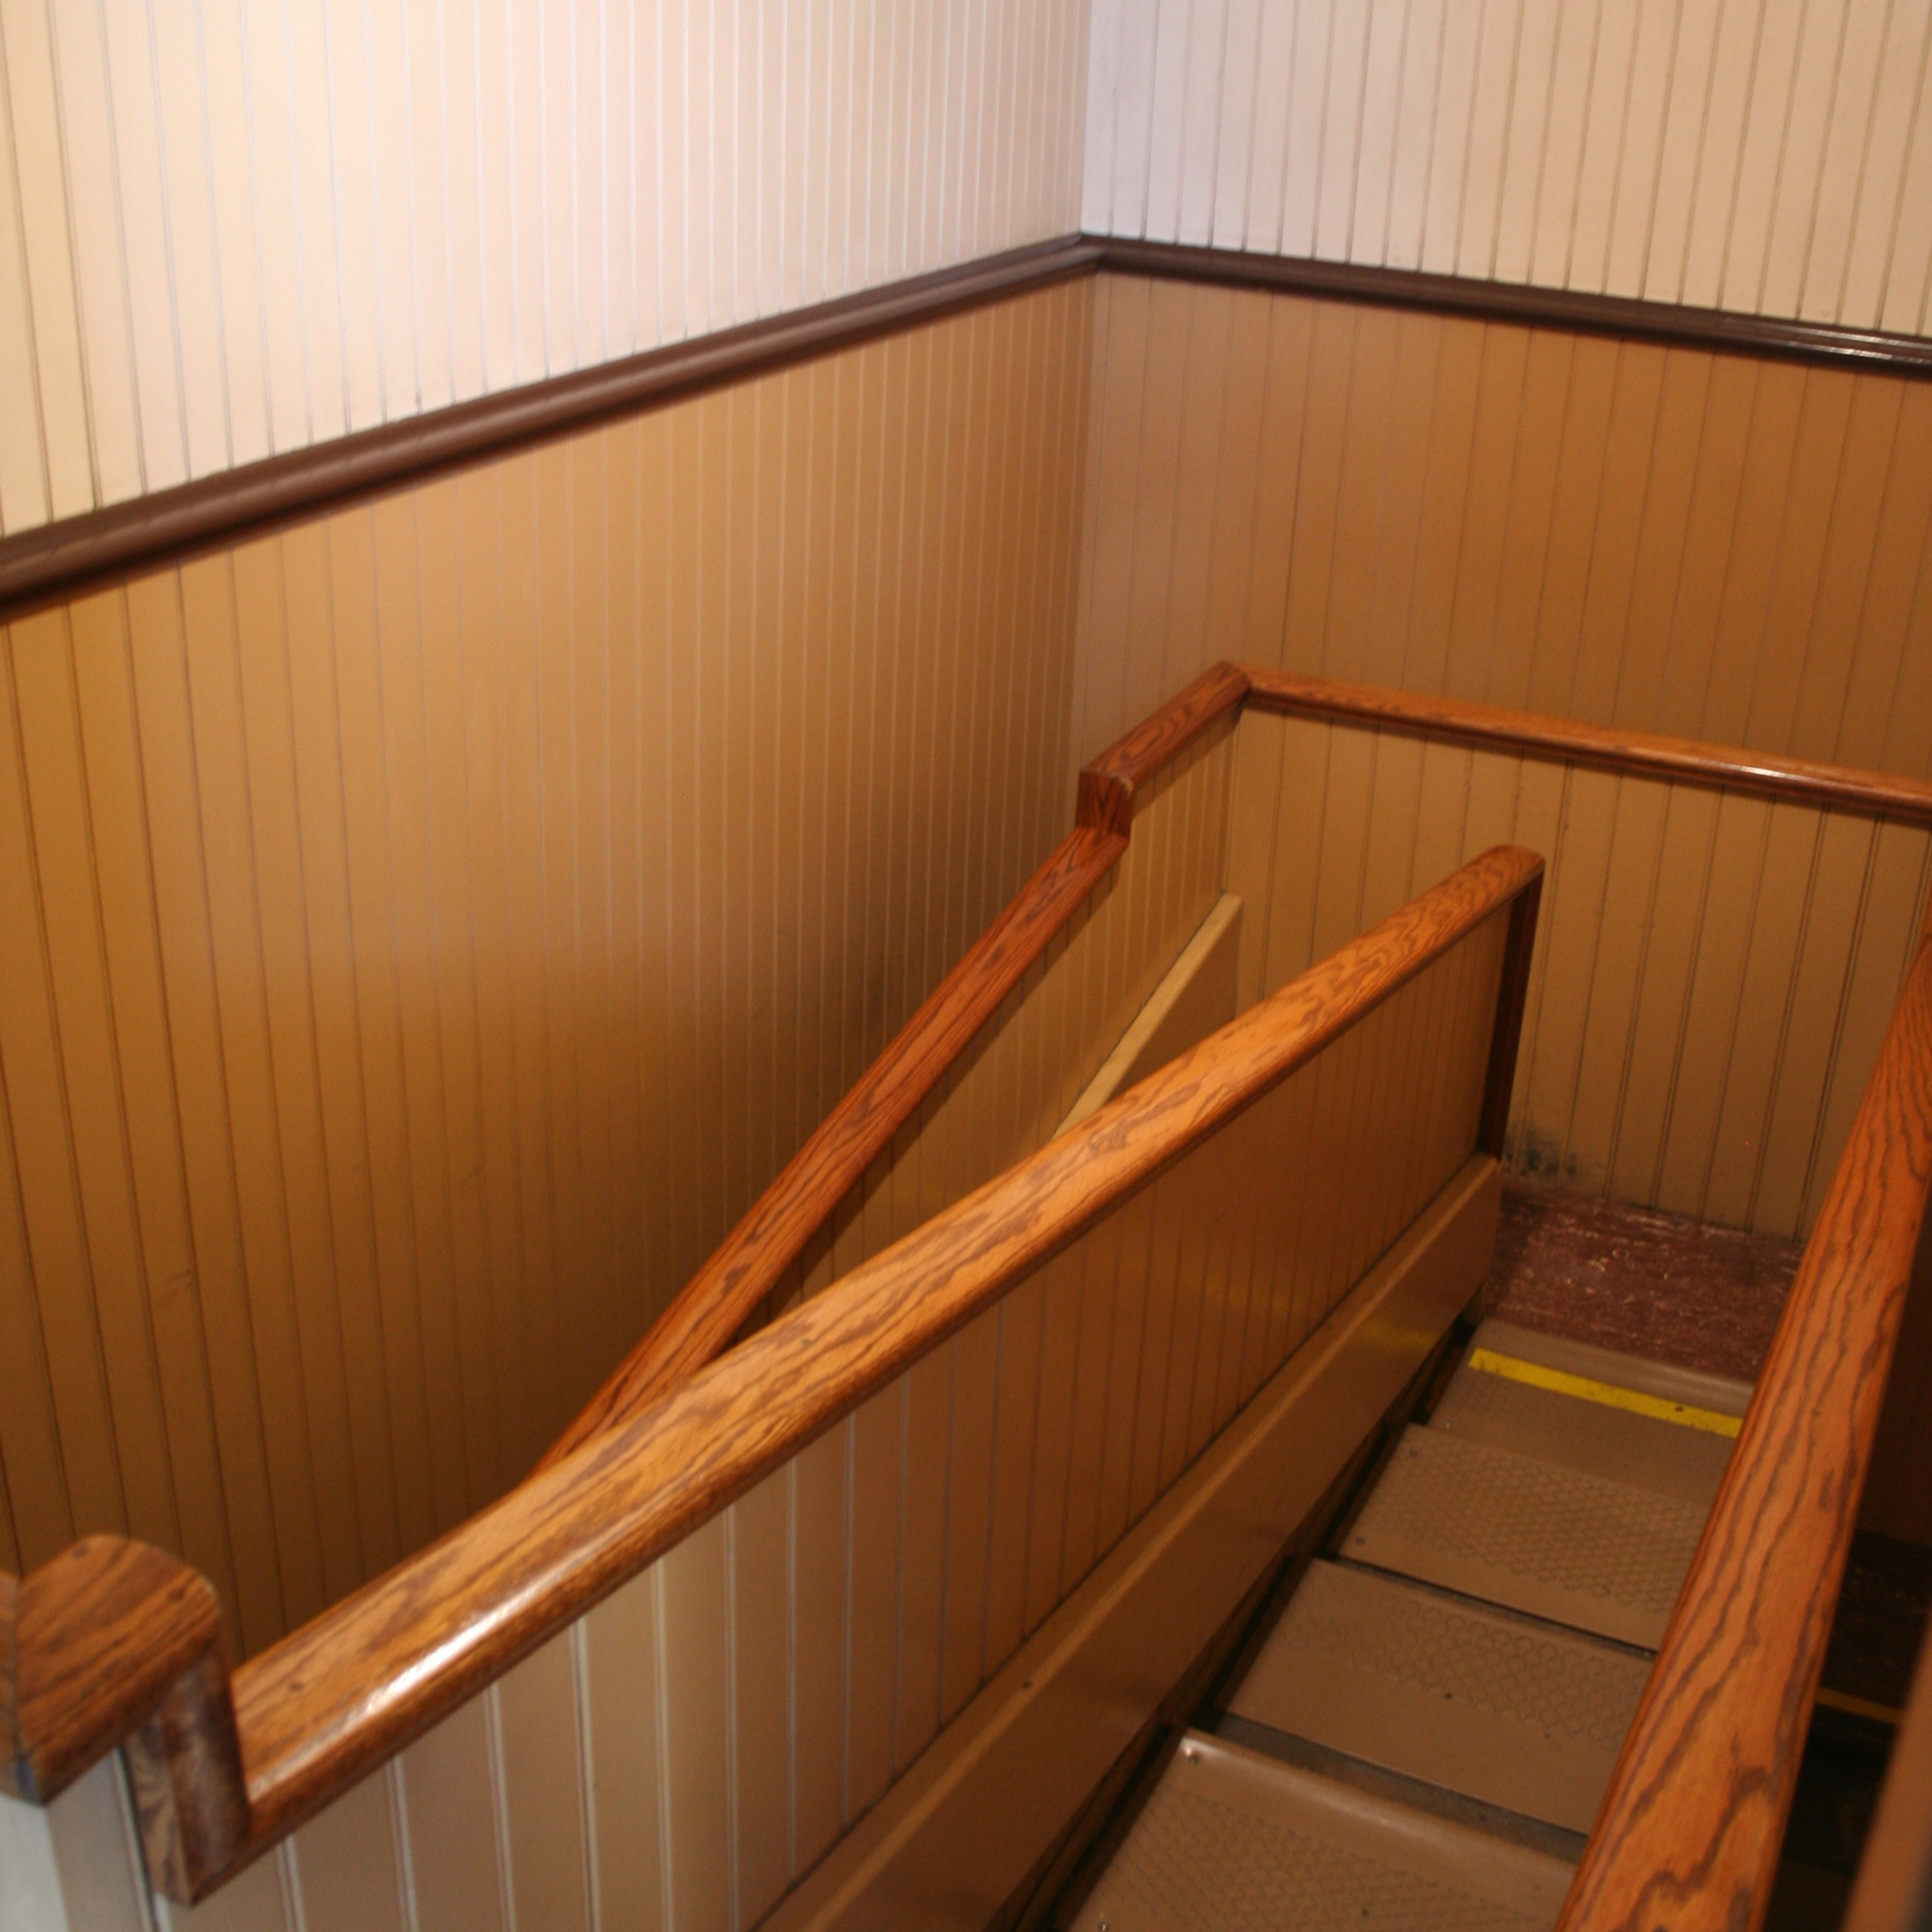 Steps at Winchester Mystery House